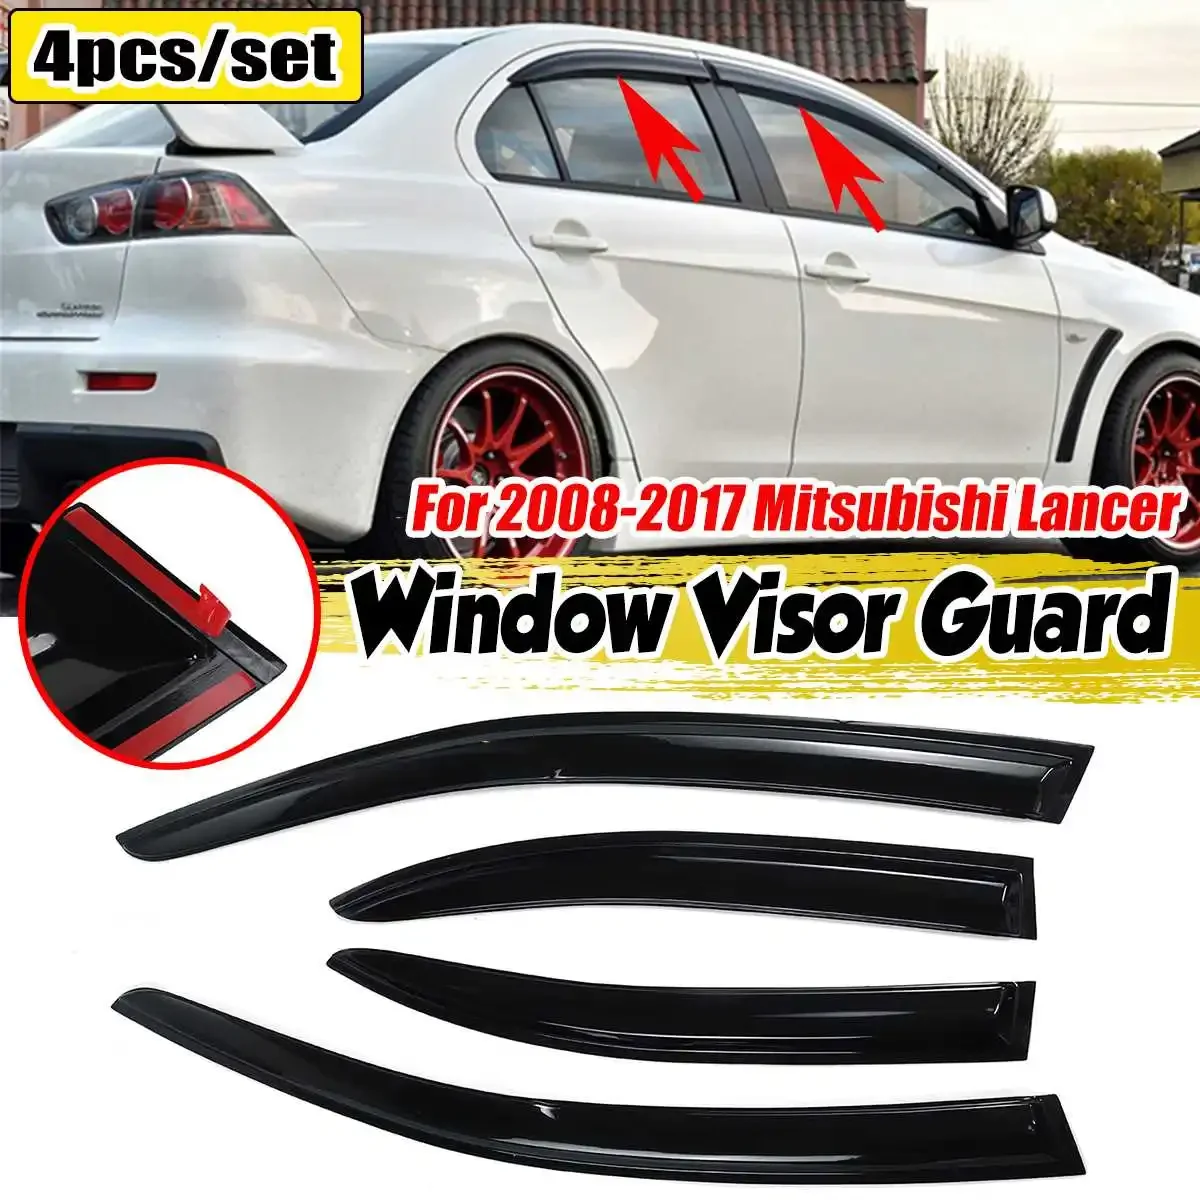 

High Qualiuty 4Pcs Car Side Window Visor Guard Vent Cover Trim Awnings Shelters Protection Guard For Mitsubishi Lancer 2008-2017